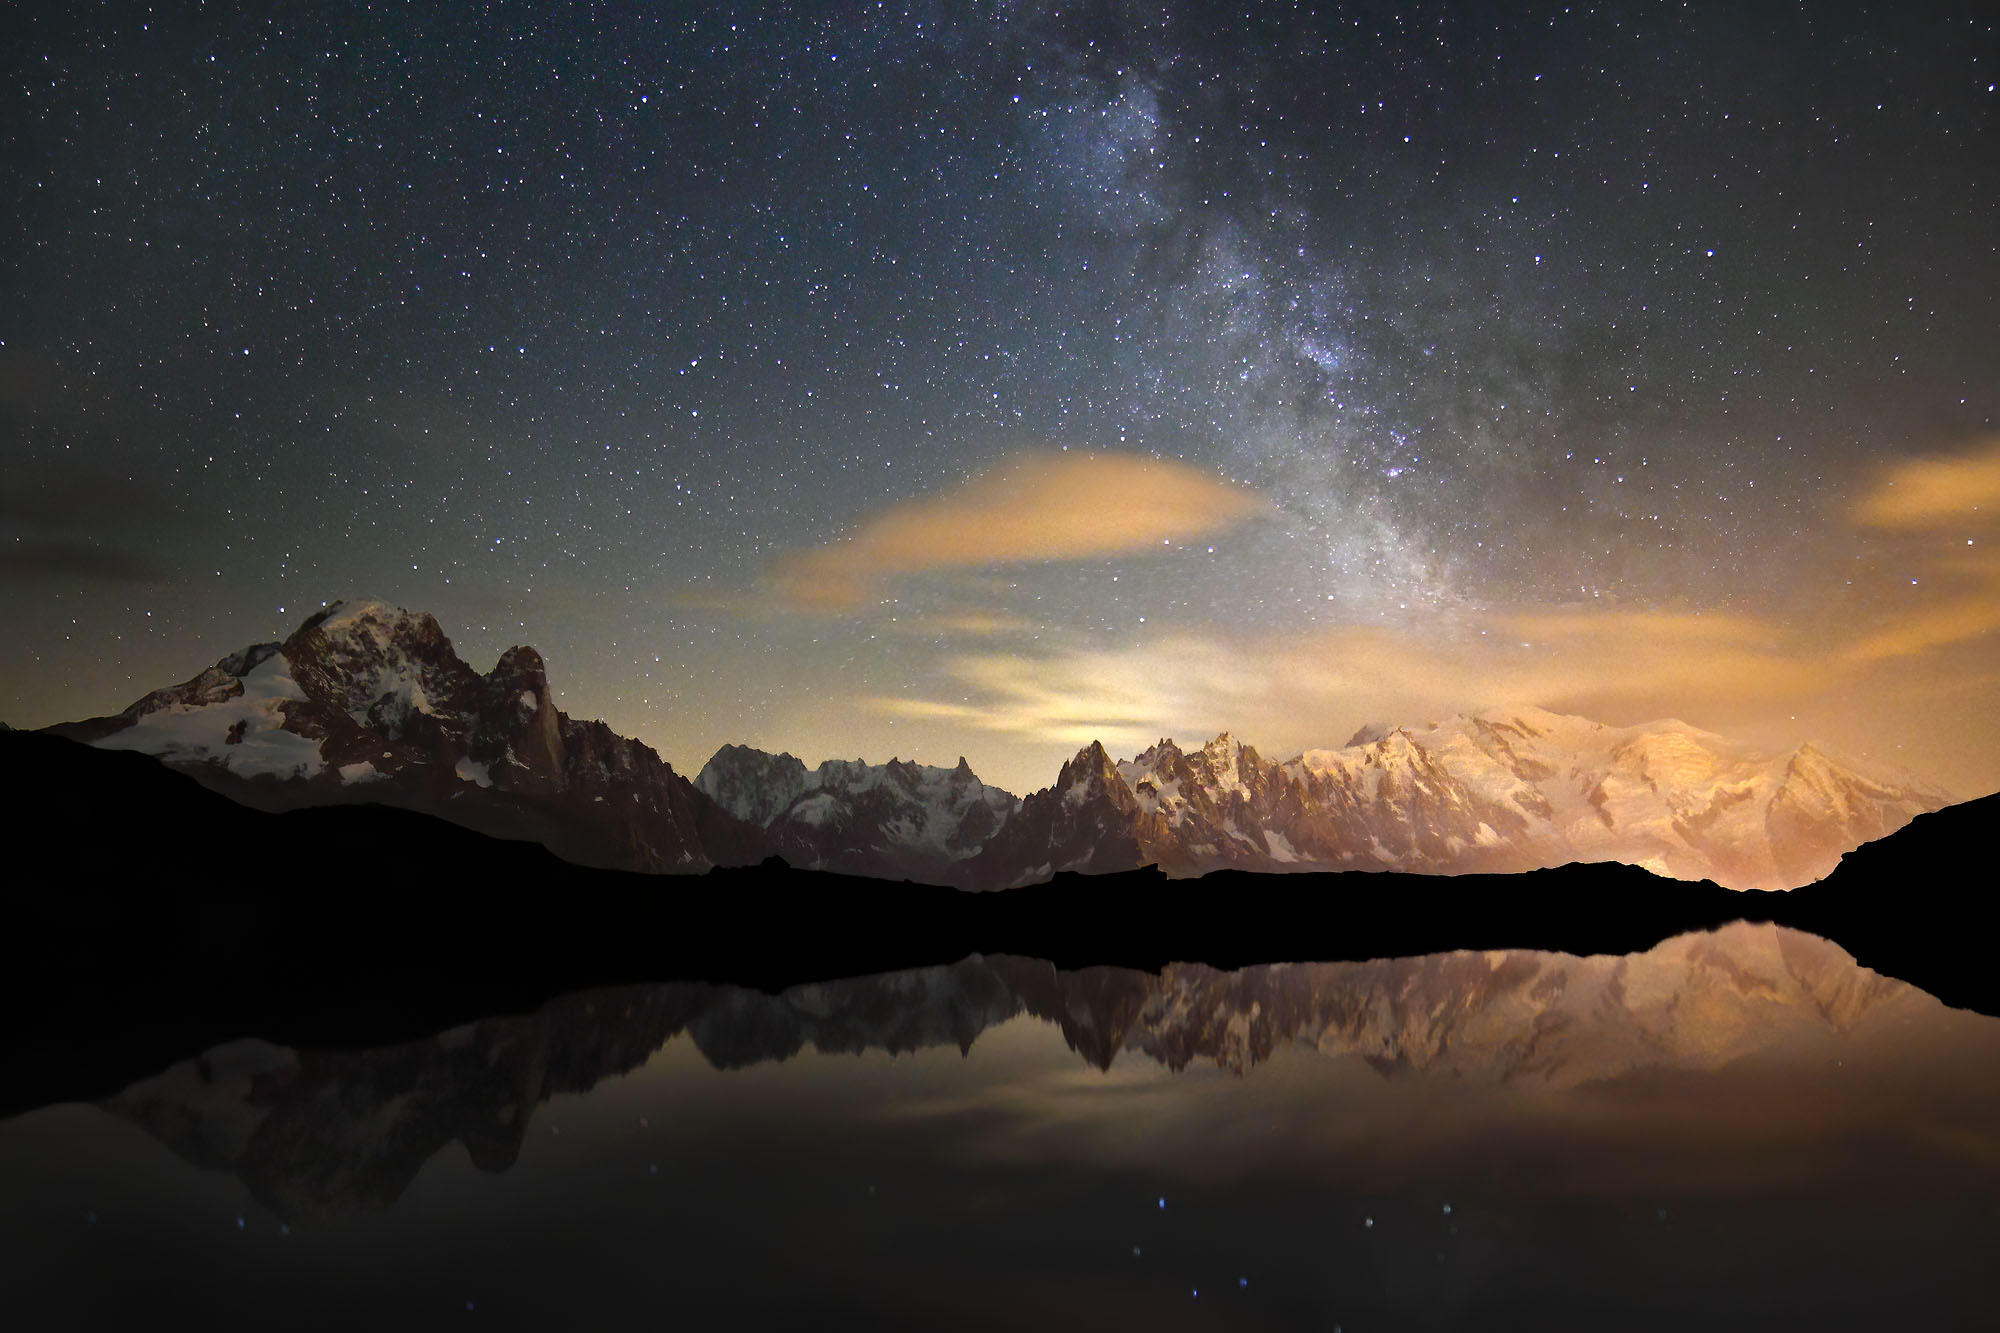 Nighttime Mont Blanc in the French Alps reflecting in alpine lake Lac de Cheserys above Chamonix with the Milky Way